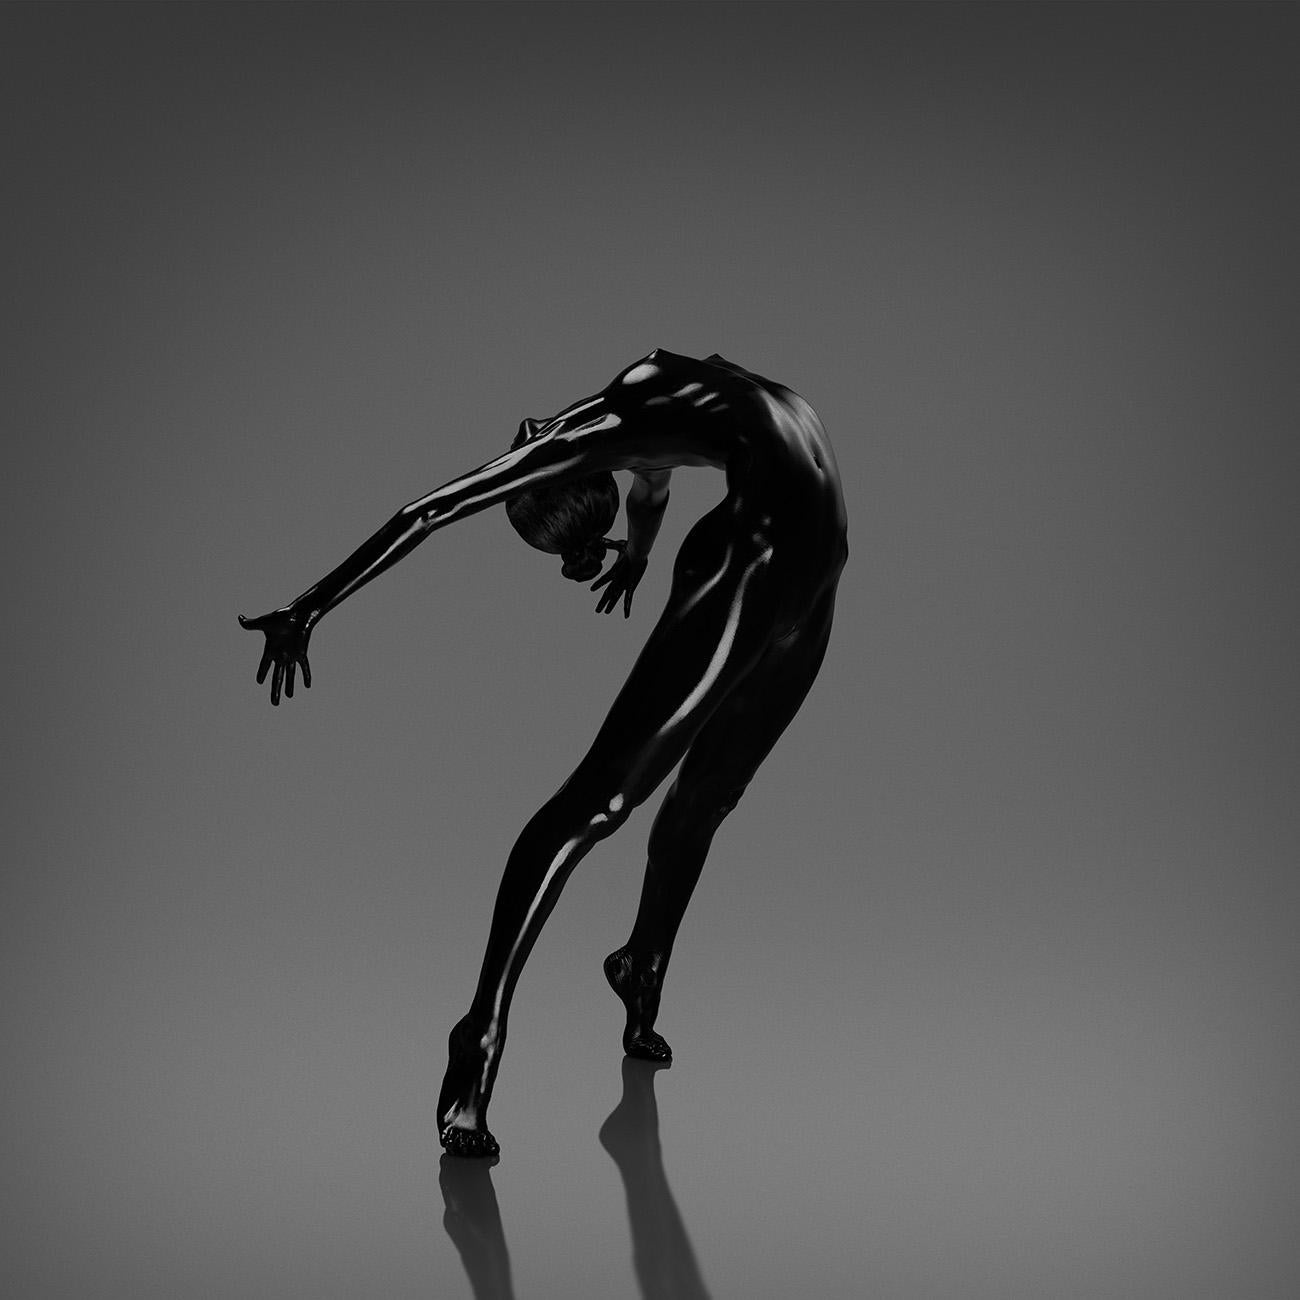 No title (No 5) Photography Edition 2/25 32x32 inch by Yevgeniy Repiashenko

Year photo was taken: 2017

This picture is a part of Spirit series.
The picture shows the frozen movement of the dancer. 
Black body make-up is put on the dancer's